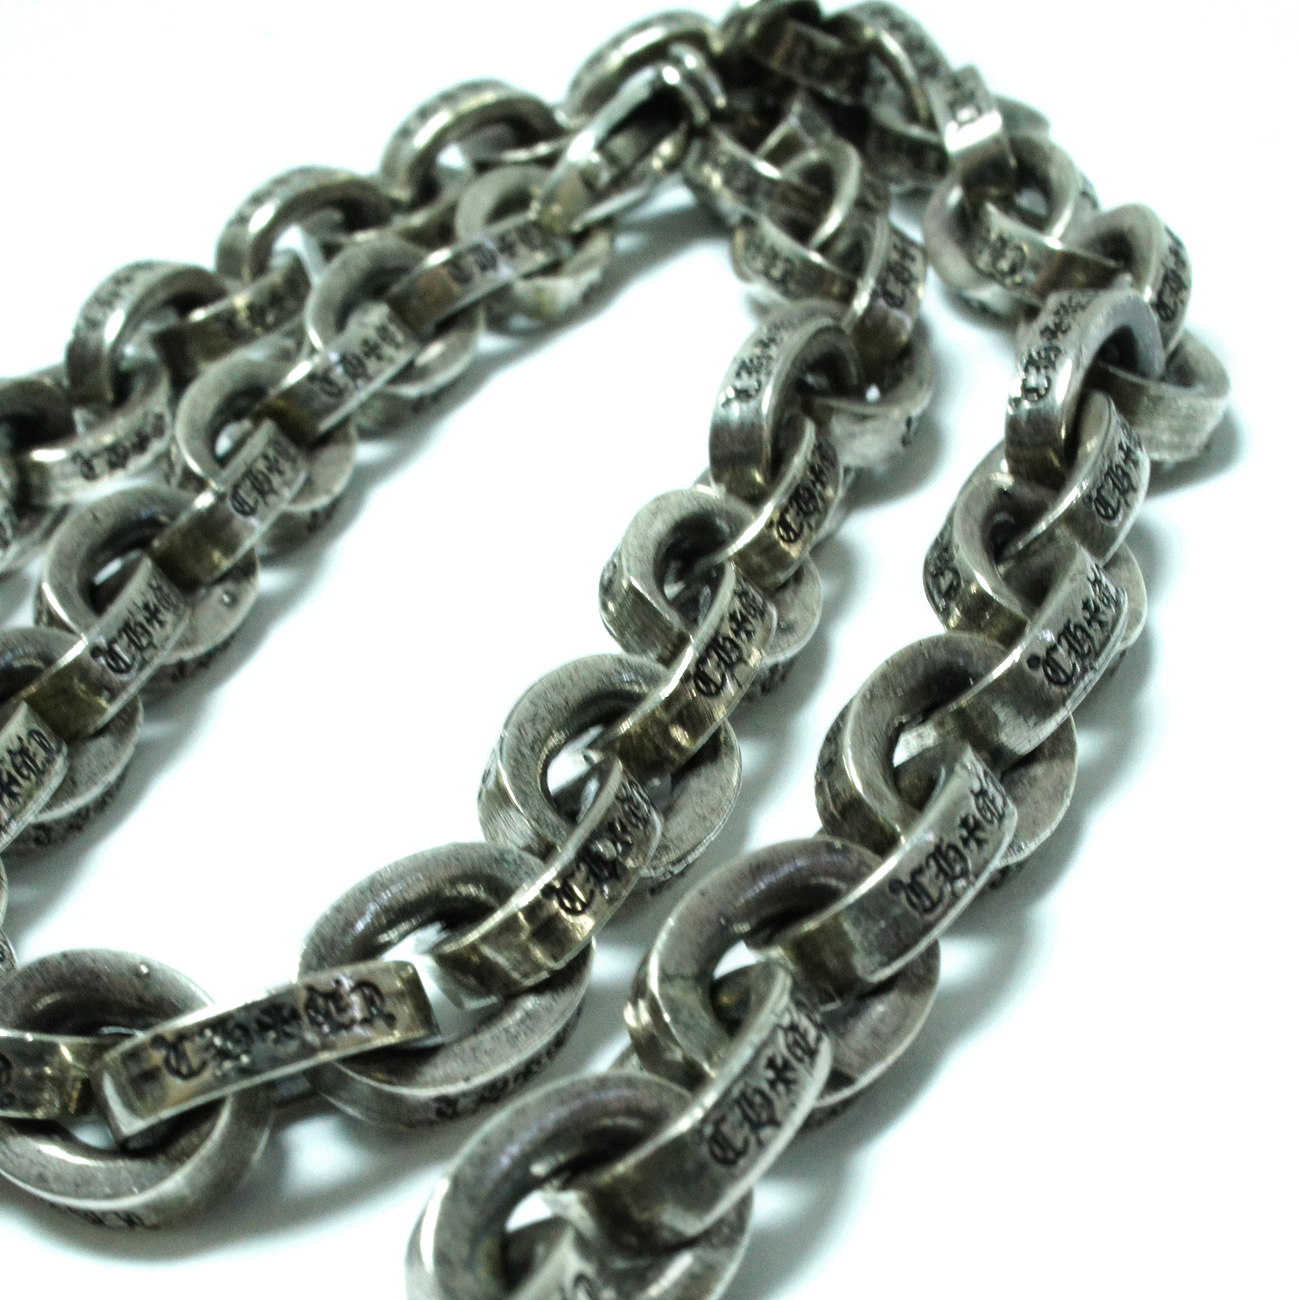 Men's :: メンズ アクセサリー :: ネックレス :: クロムハーツ ラージ ペーパーチェーン ネックレス 18インチ / CHROME  HEARTS Large Paper Chain Necklace 18 in